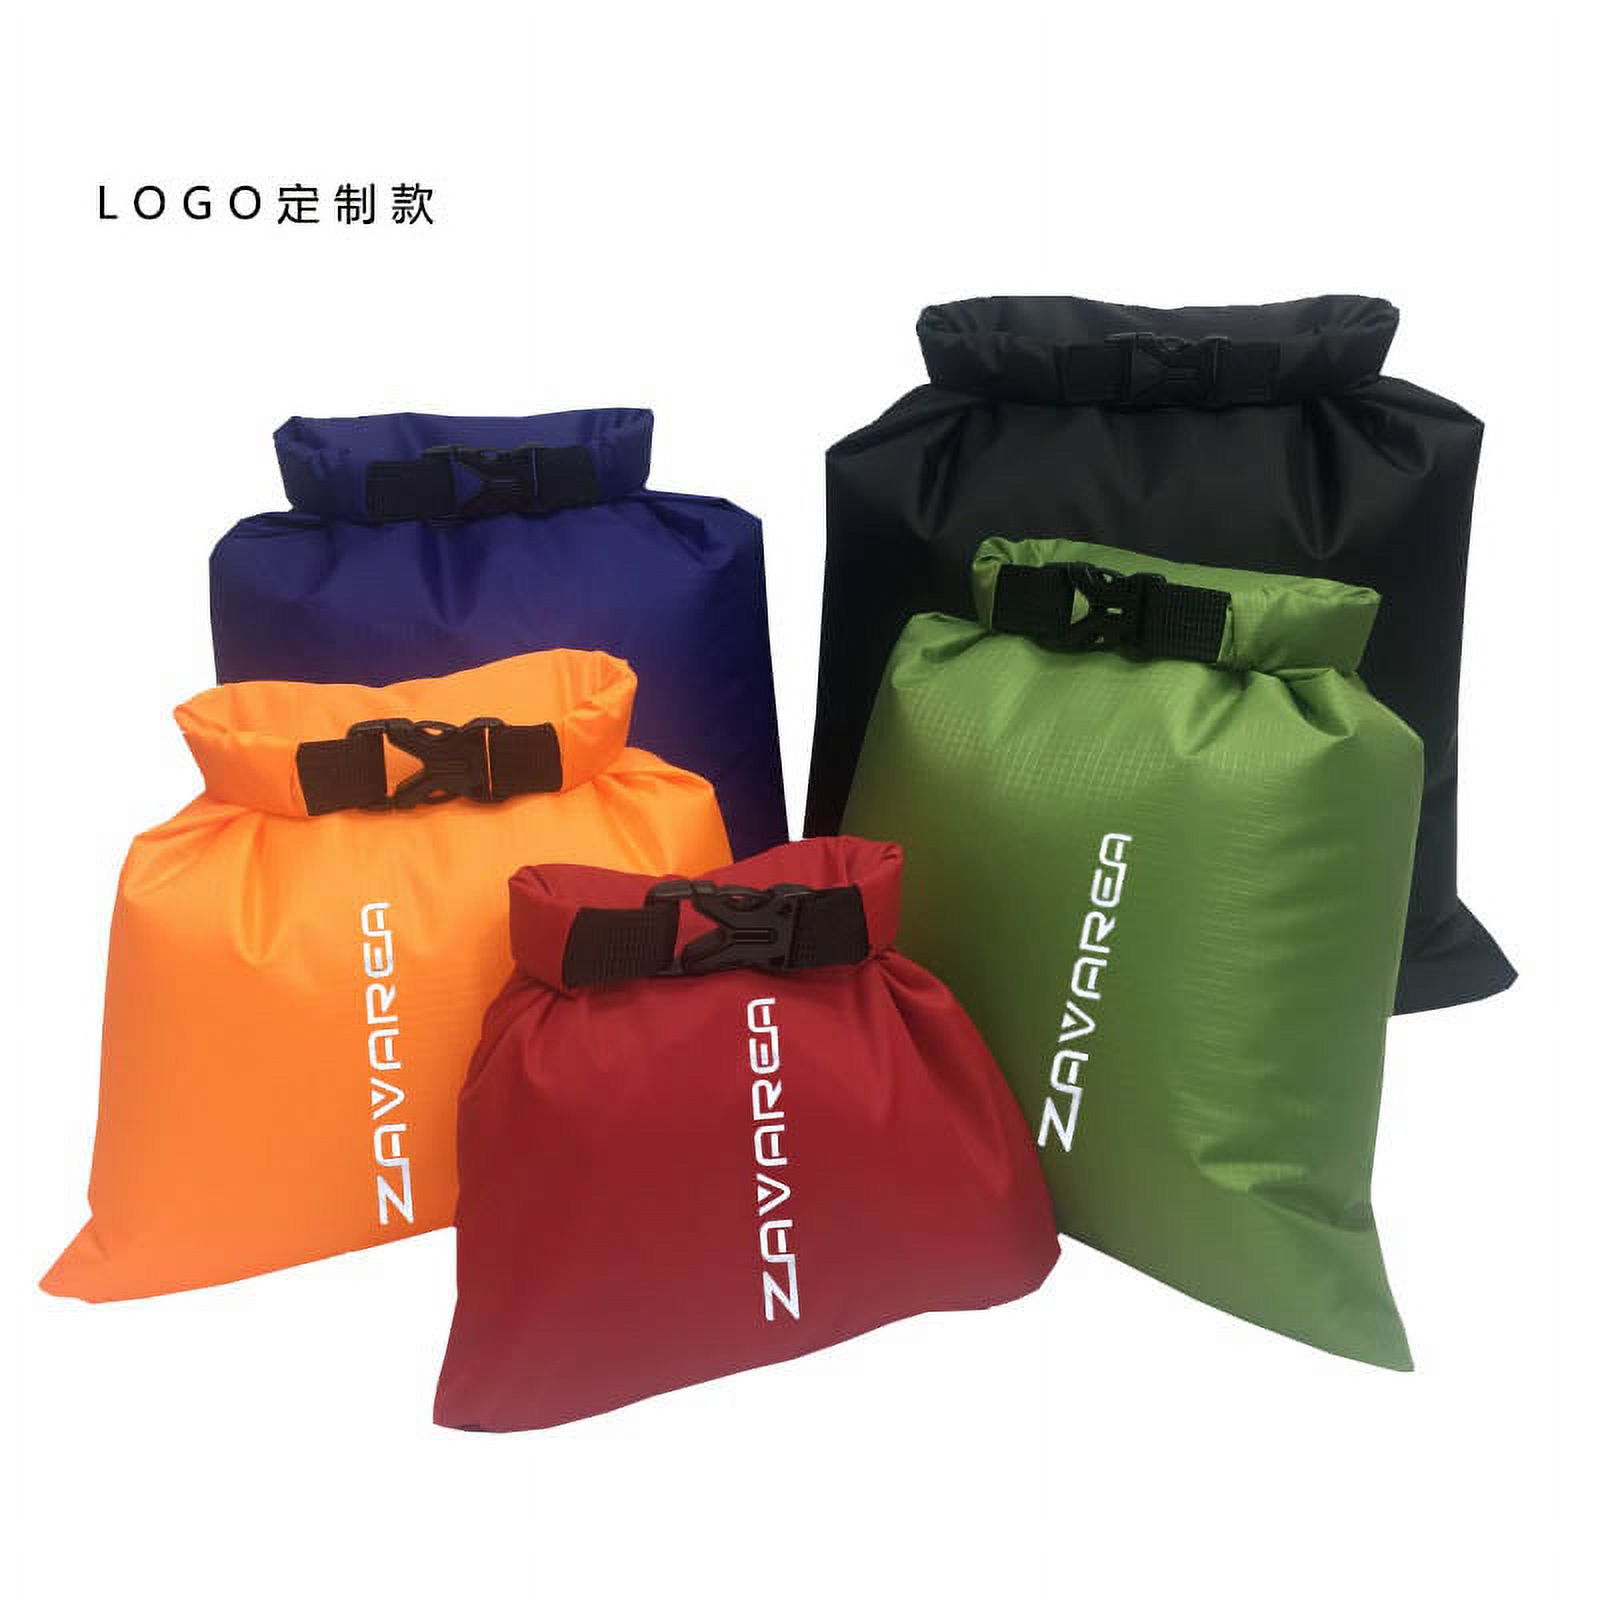 5Pcs/Set Waterproof Dry Bag, Roll Top Dry Compression Sack for Kayaking, Beach, Rafting, Boating, Hiking, Camping and Fishing - image 1 of 1